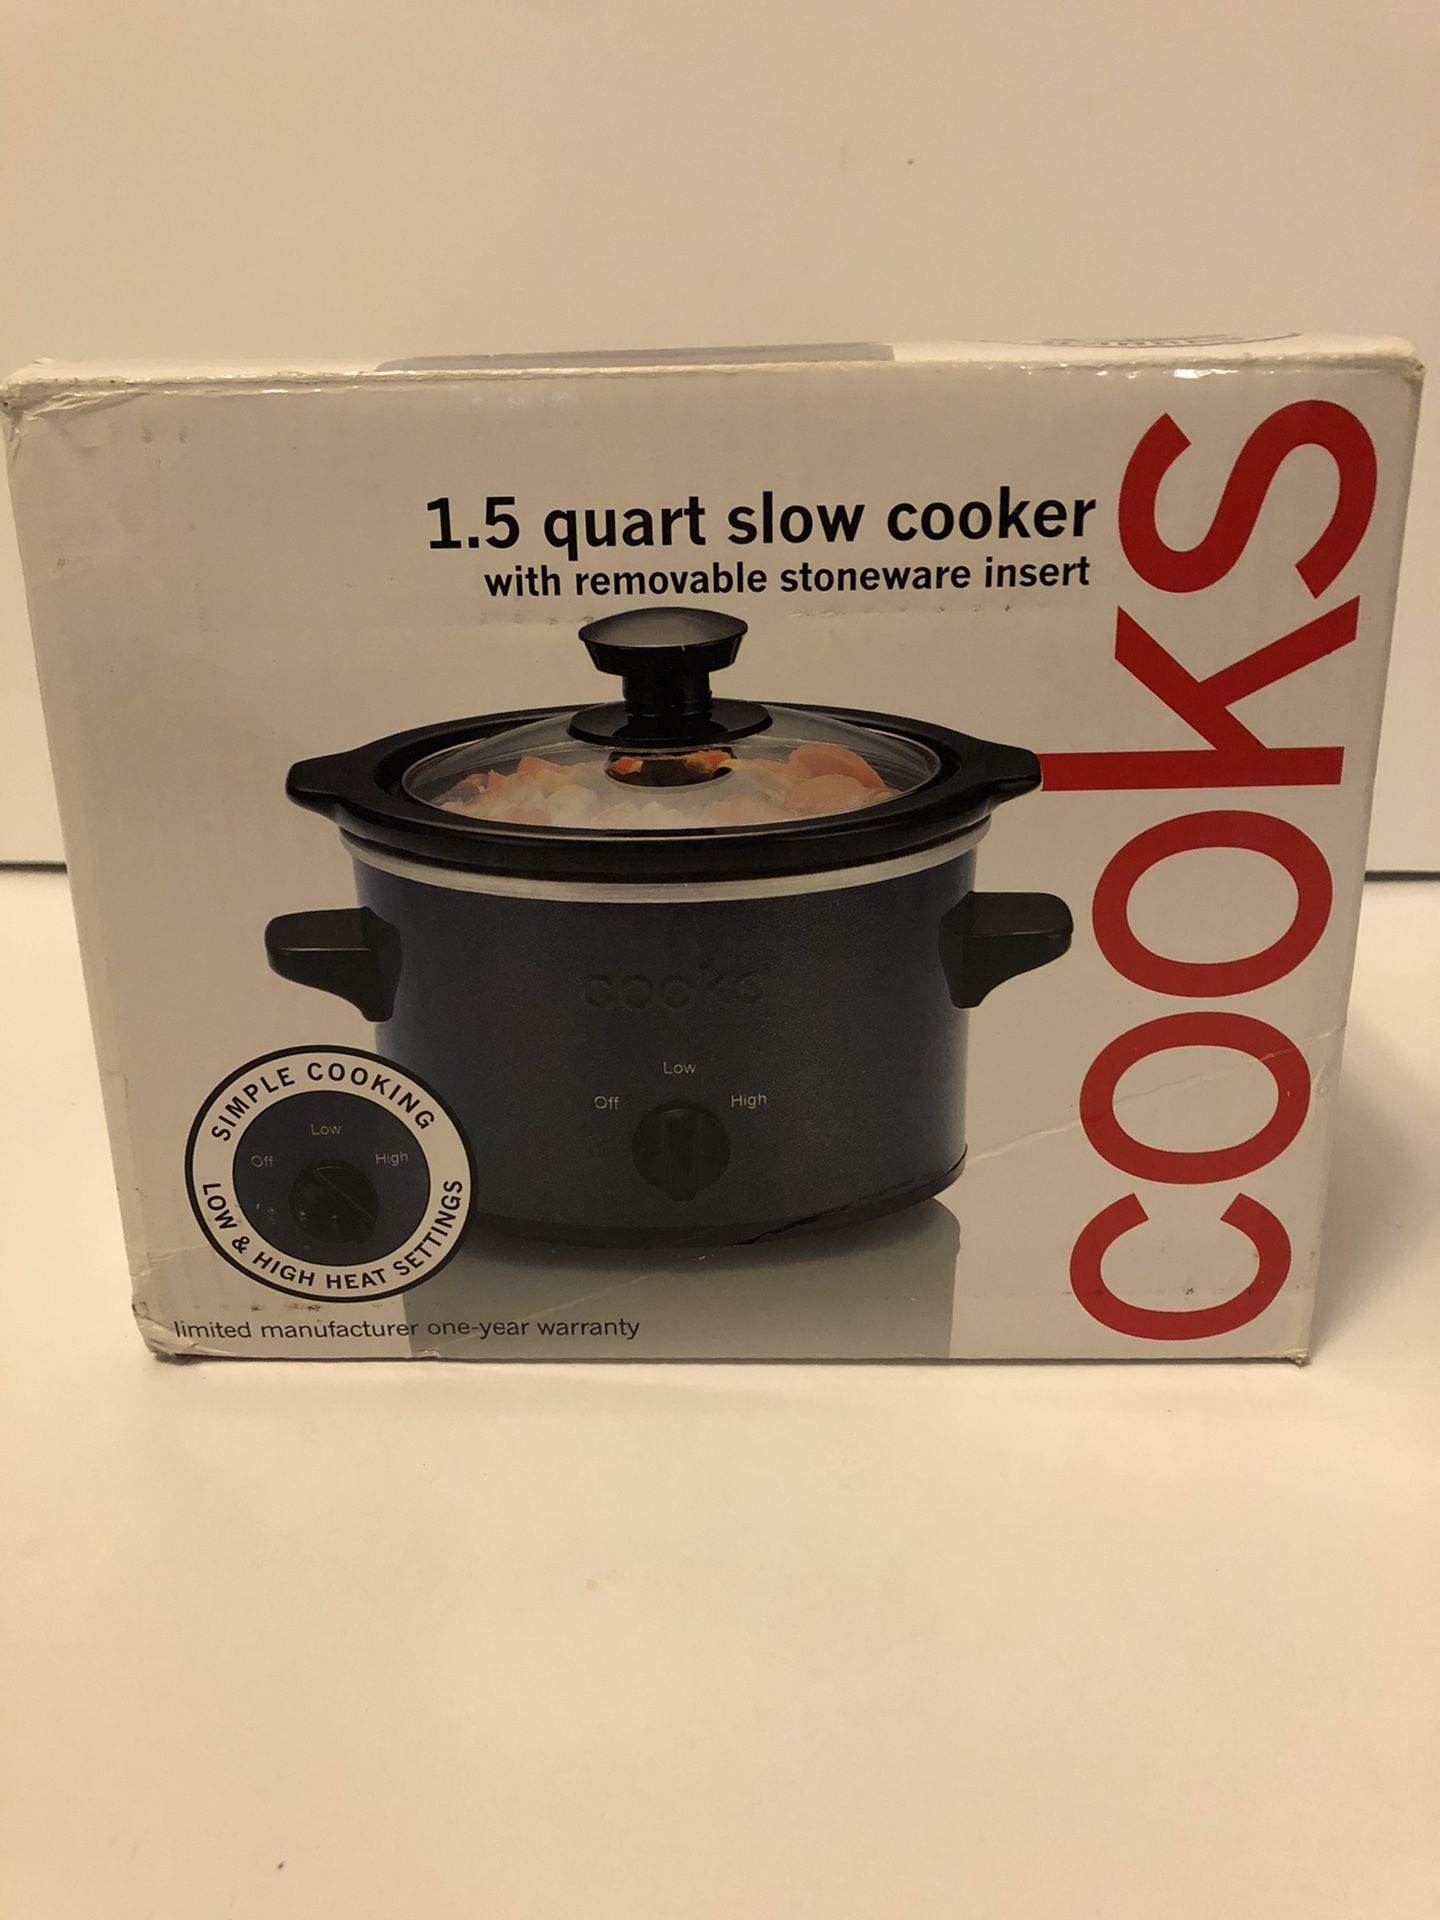 Cooks 1.5 Slow Cooker